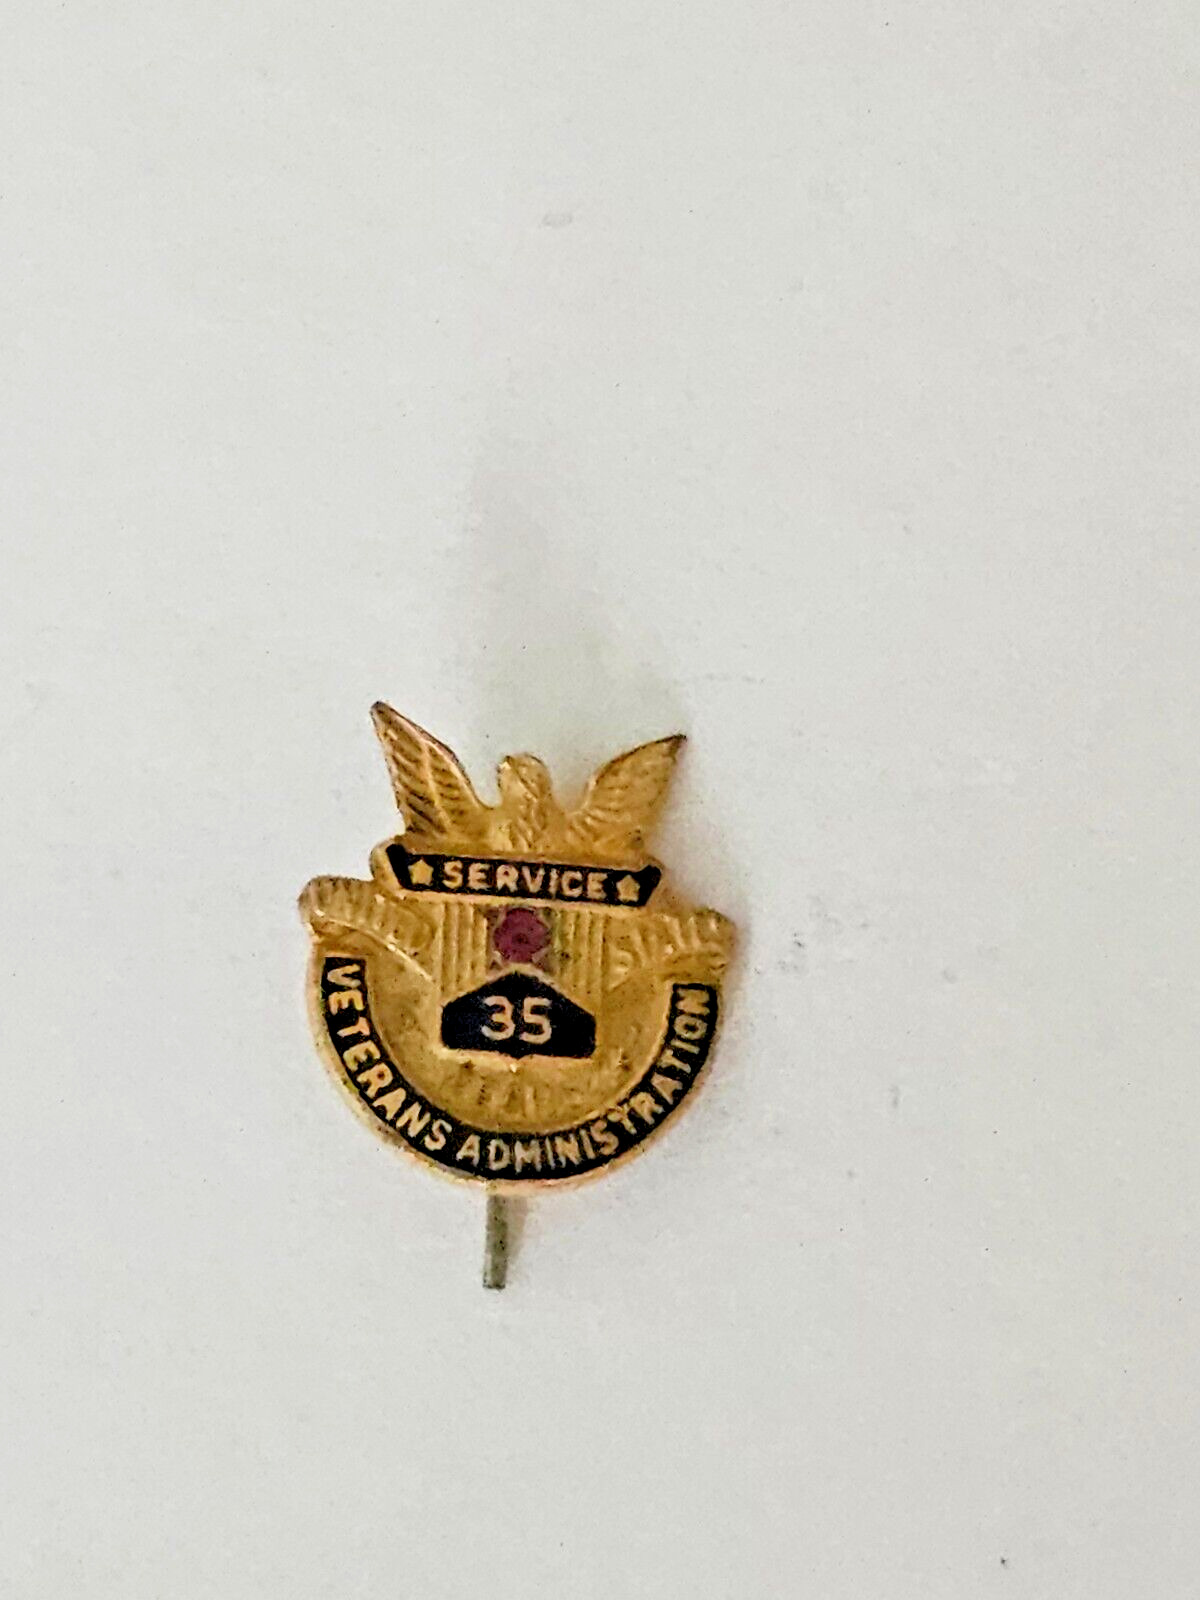 35 Years Veterans Administration Gold Pin Set with Small Ruby/Garnet